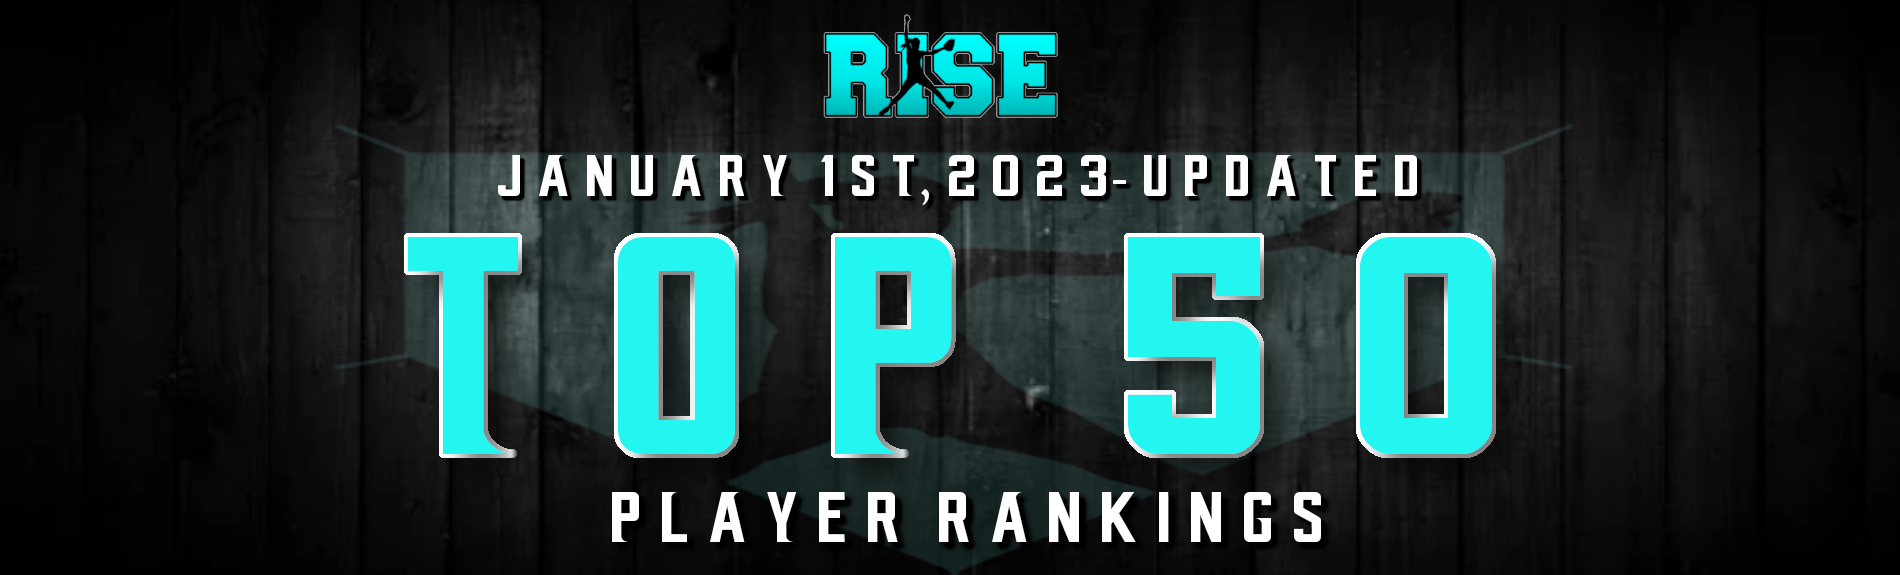 RISE “Top 50” UPDATED Player Rankings-(January 1st, 2023)